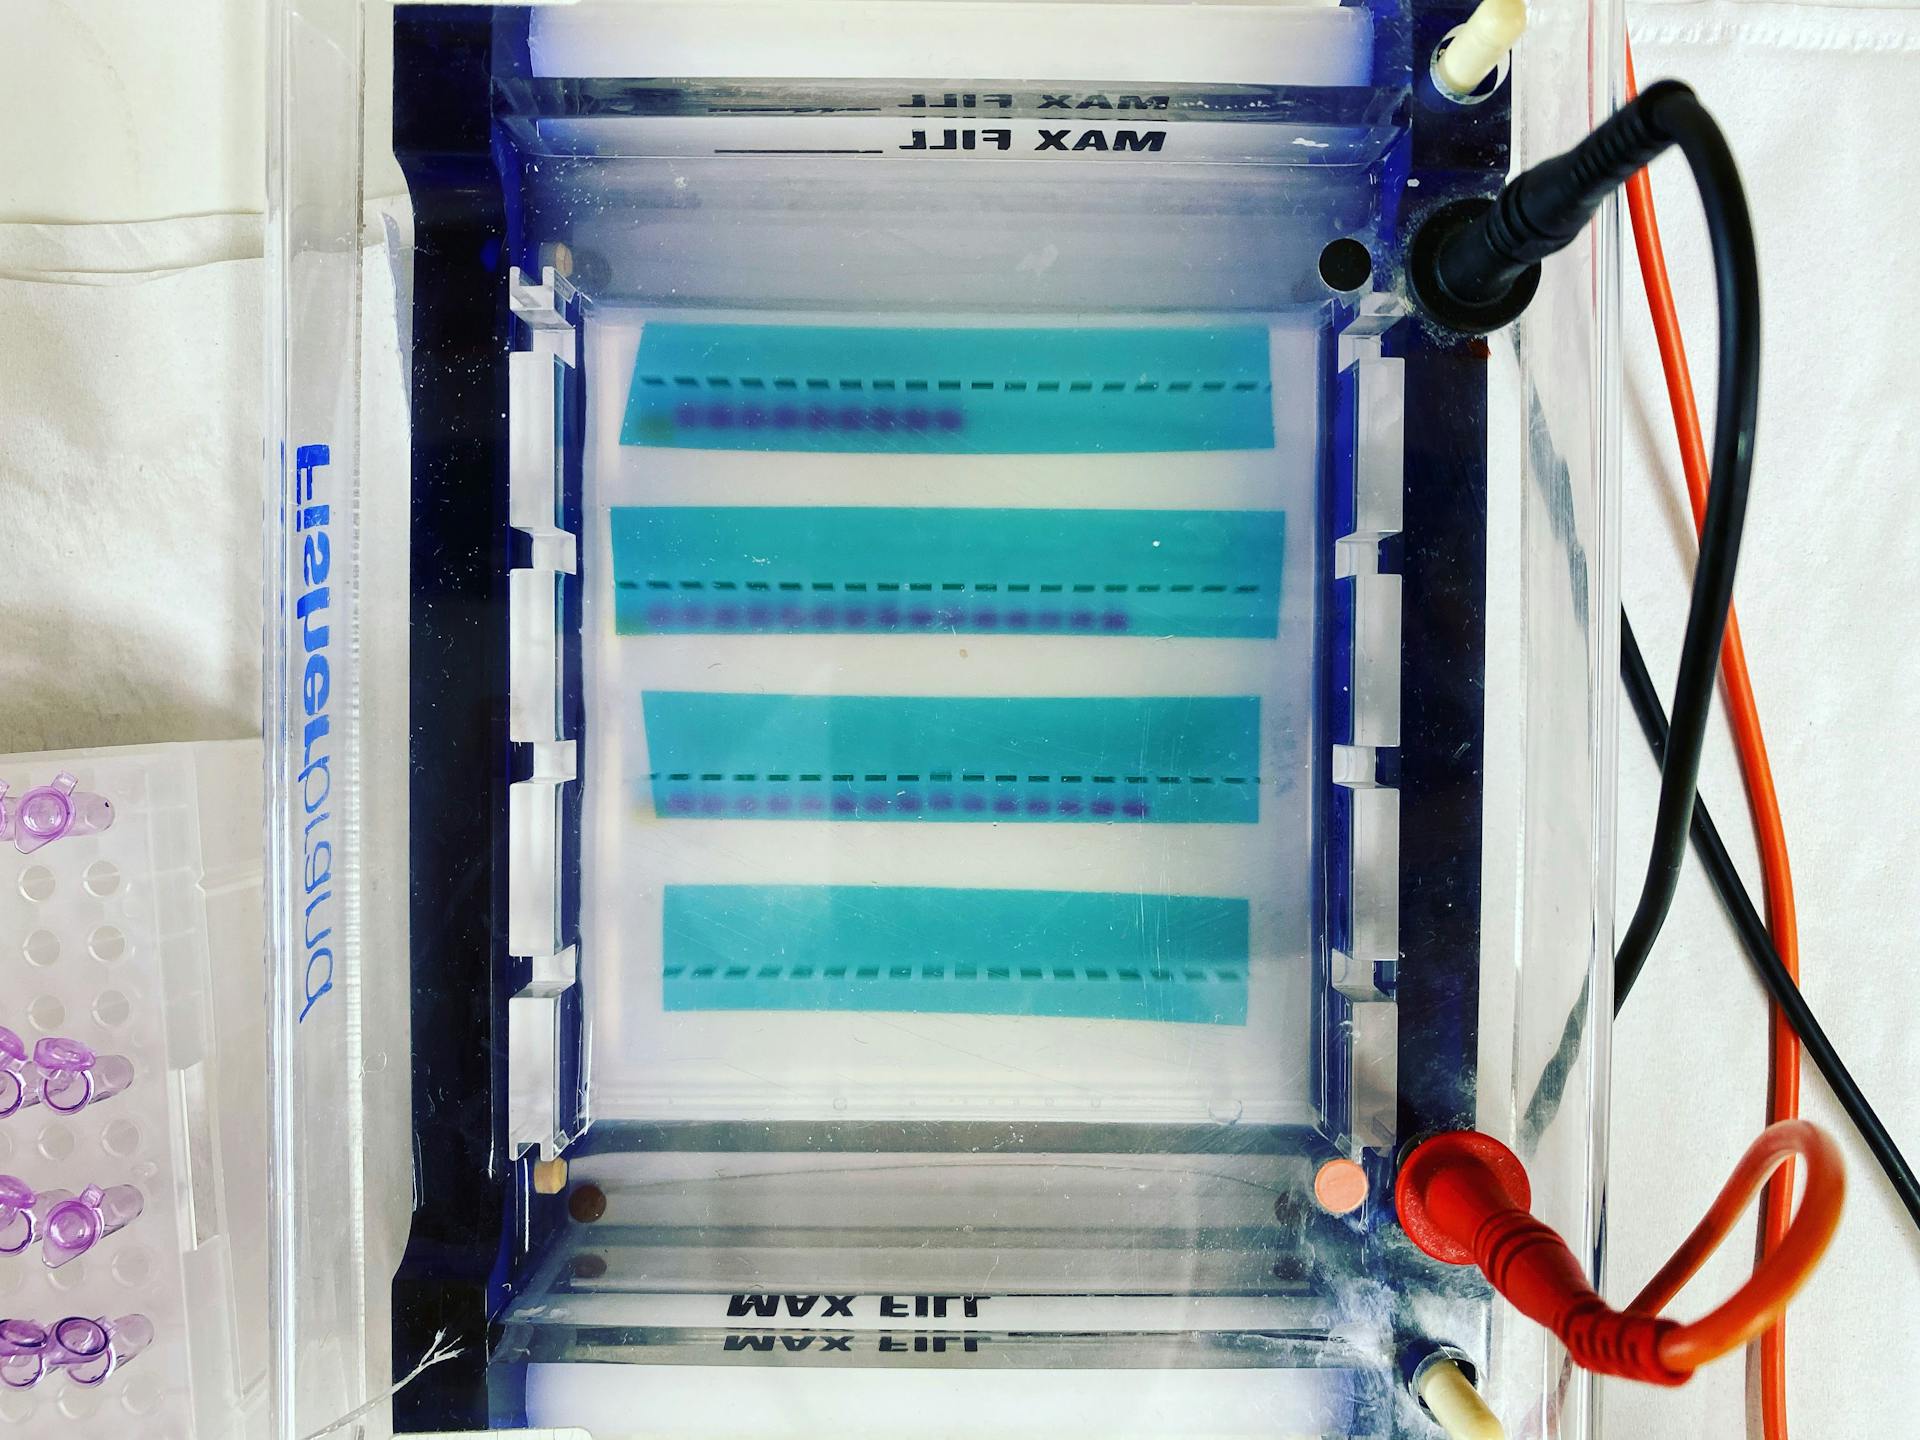 Gel electrophoresis in progress. Each tiny well was loaded with a DNA sample previously amplified by PCR. The purple bands are an indication of how far down the gel the samples have run.